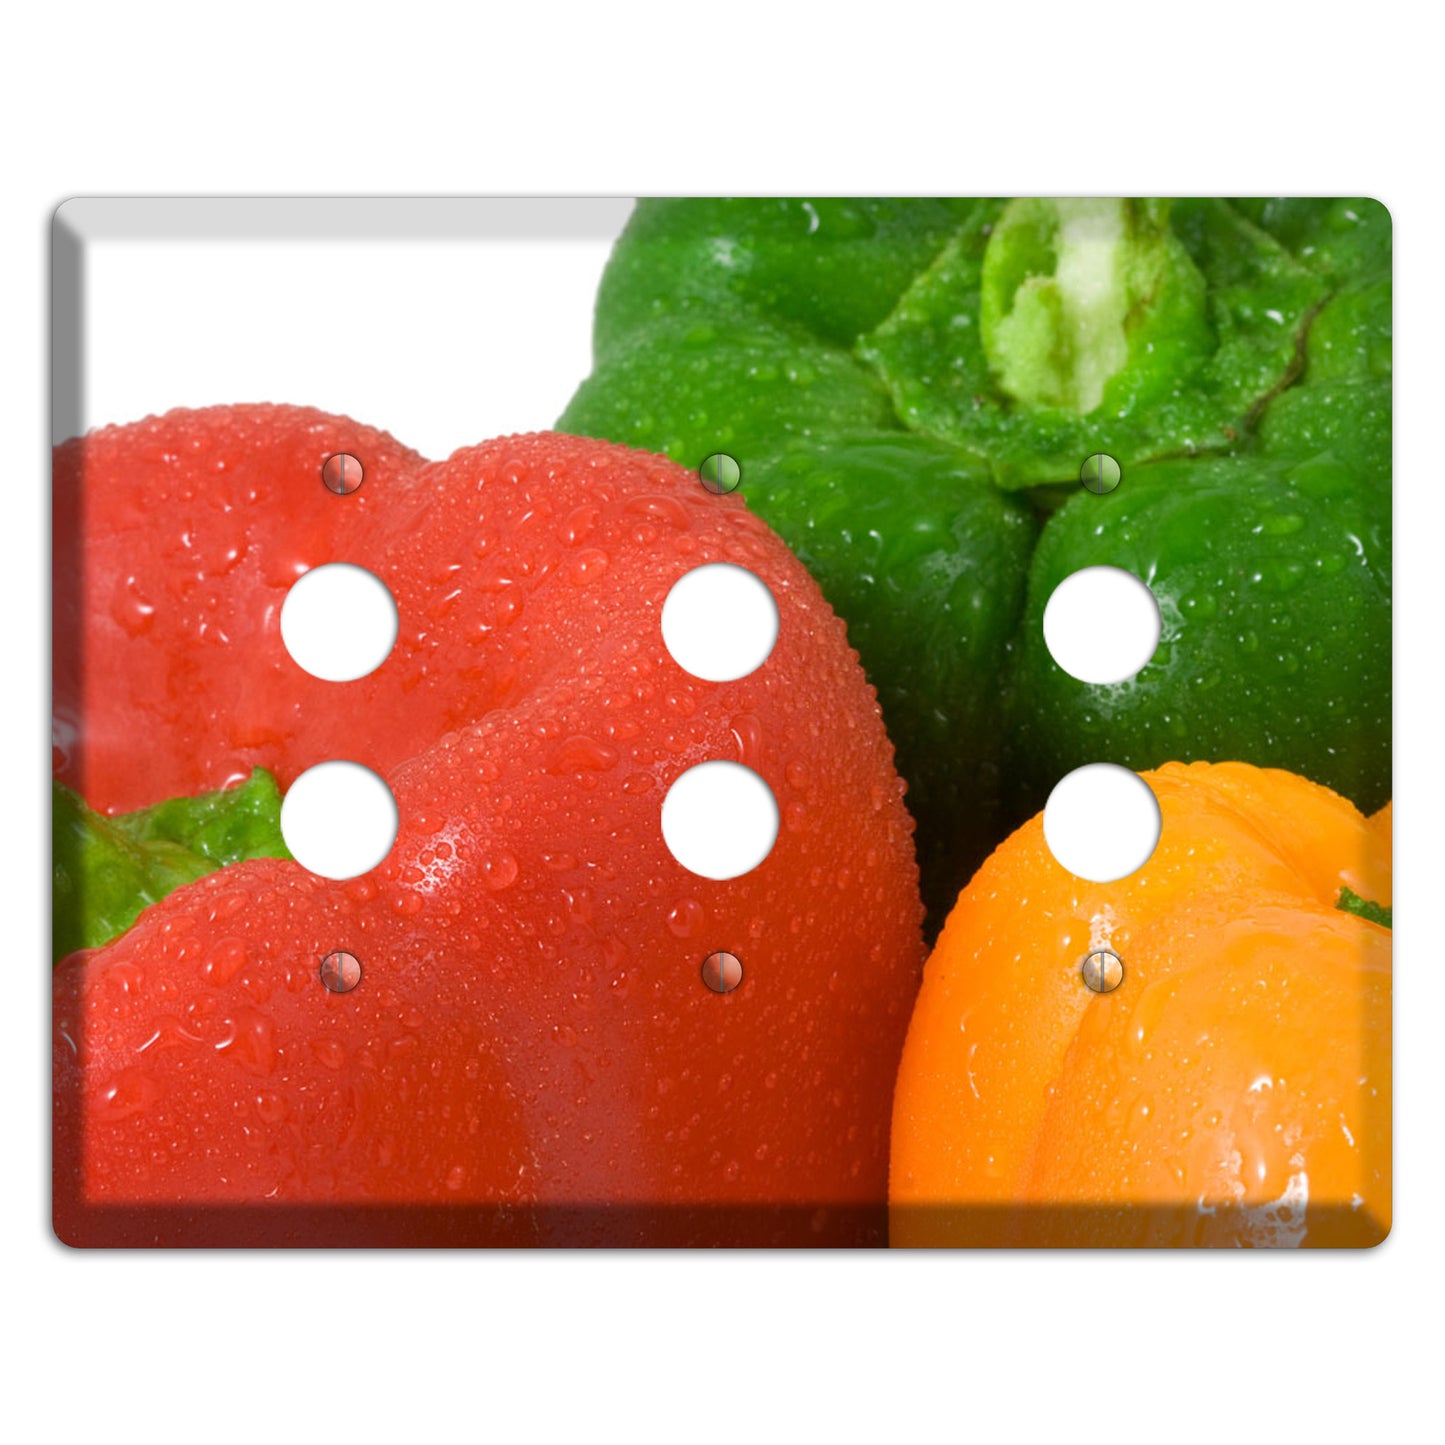 Peppers 3 Pushbutton Wallplate